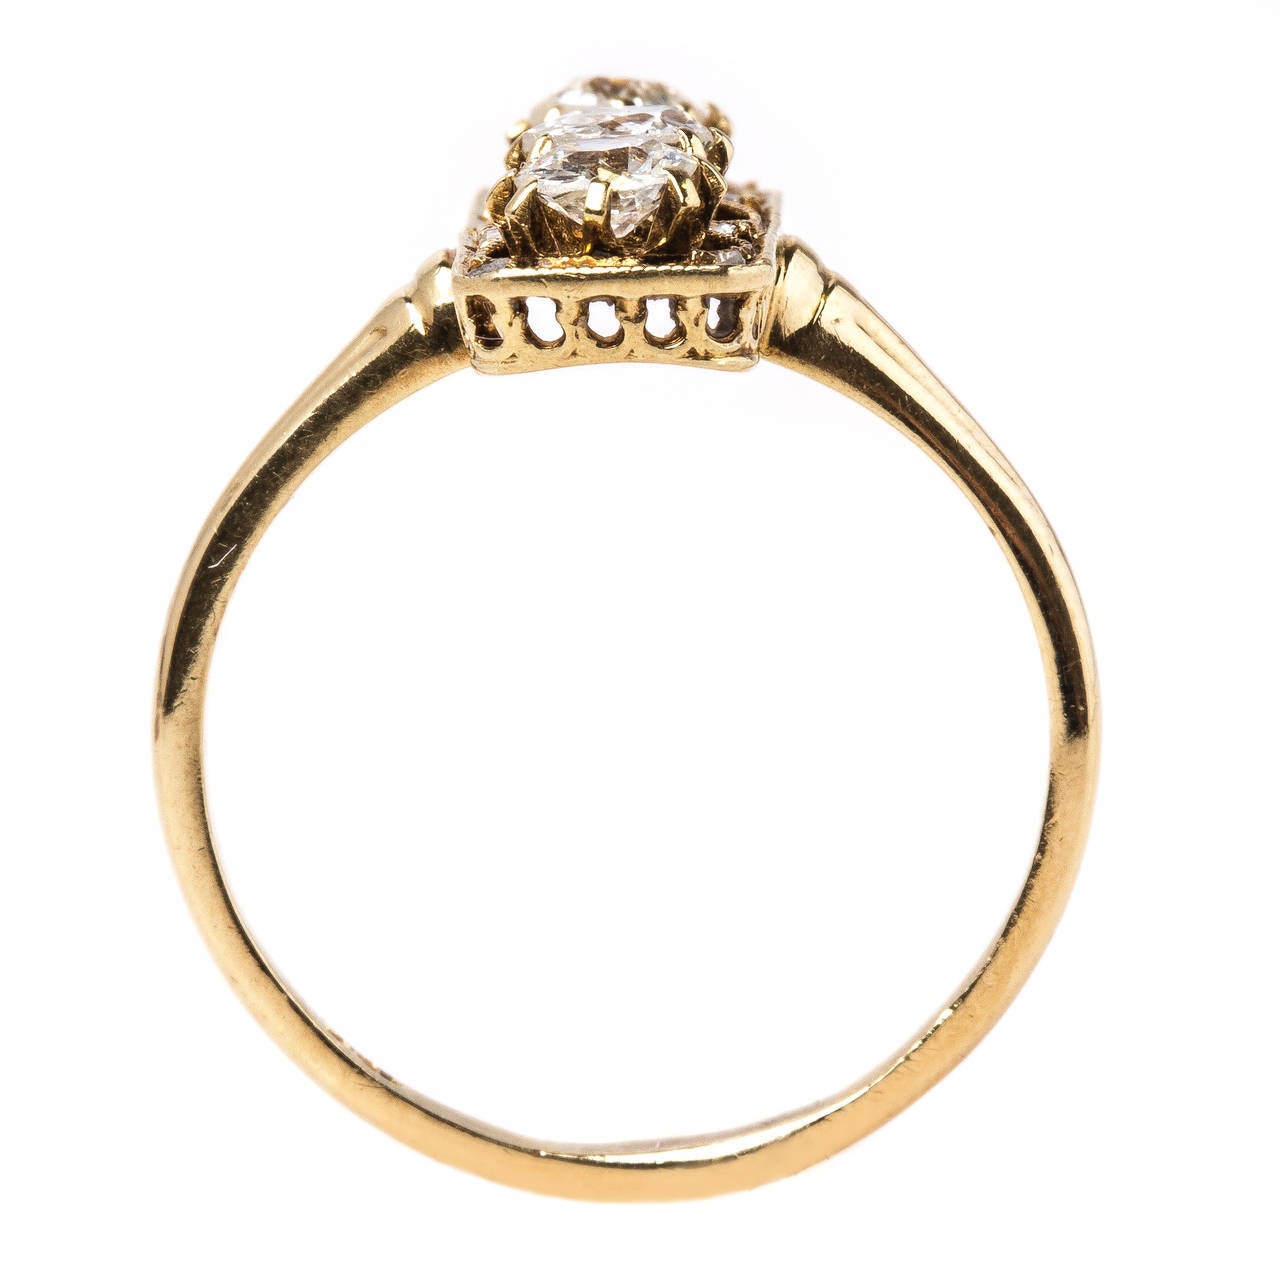 One-of-a-Kind Victorian Vertically Set Old Mine Cut Diamond Gold Engagement Ring 1